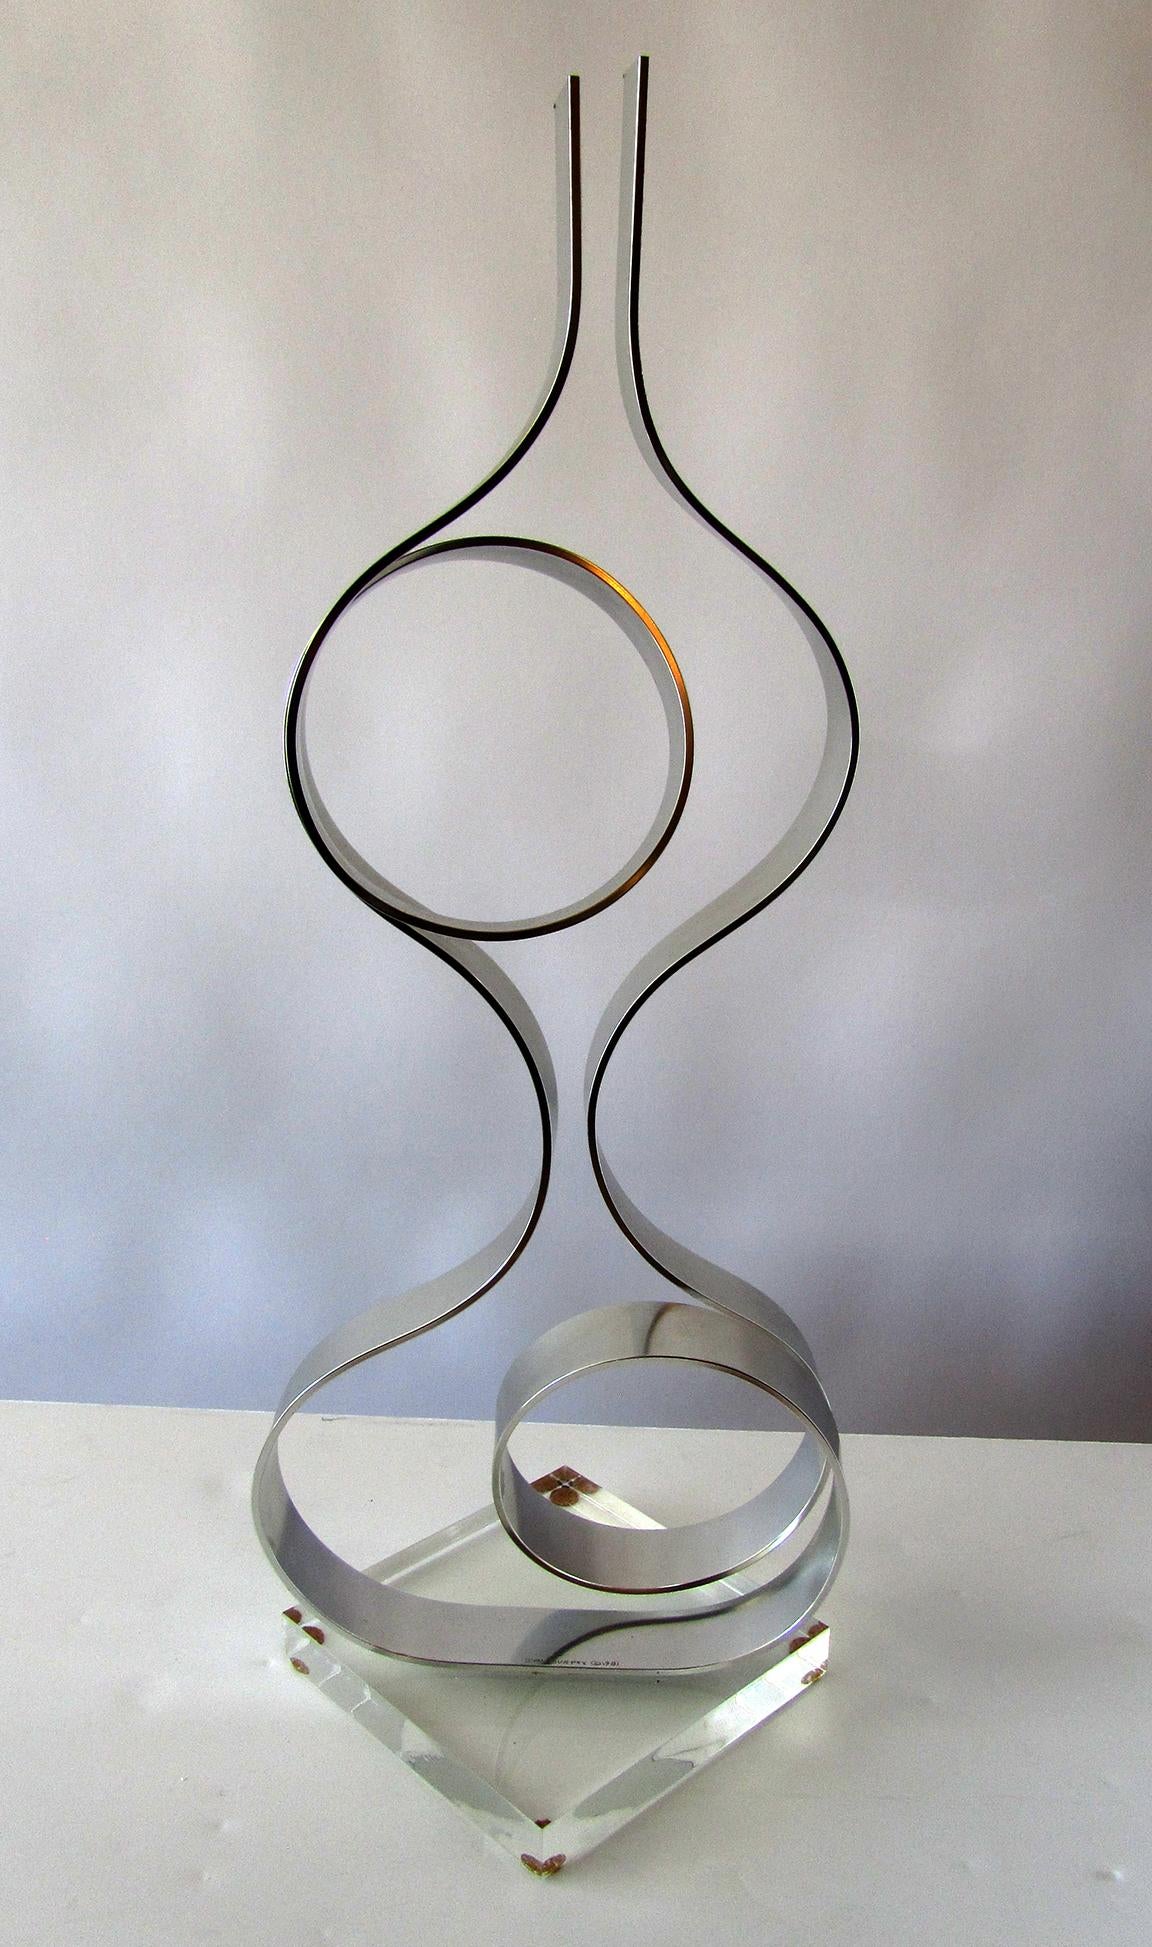 American Modern Abstract Expressionist Polished Steel Sculpture, Dan Murphy For Sale 2